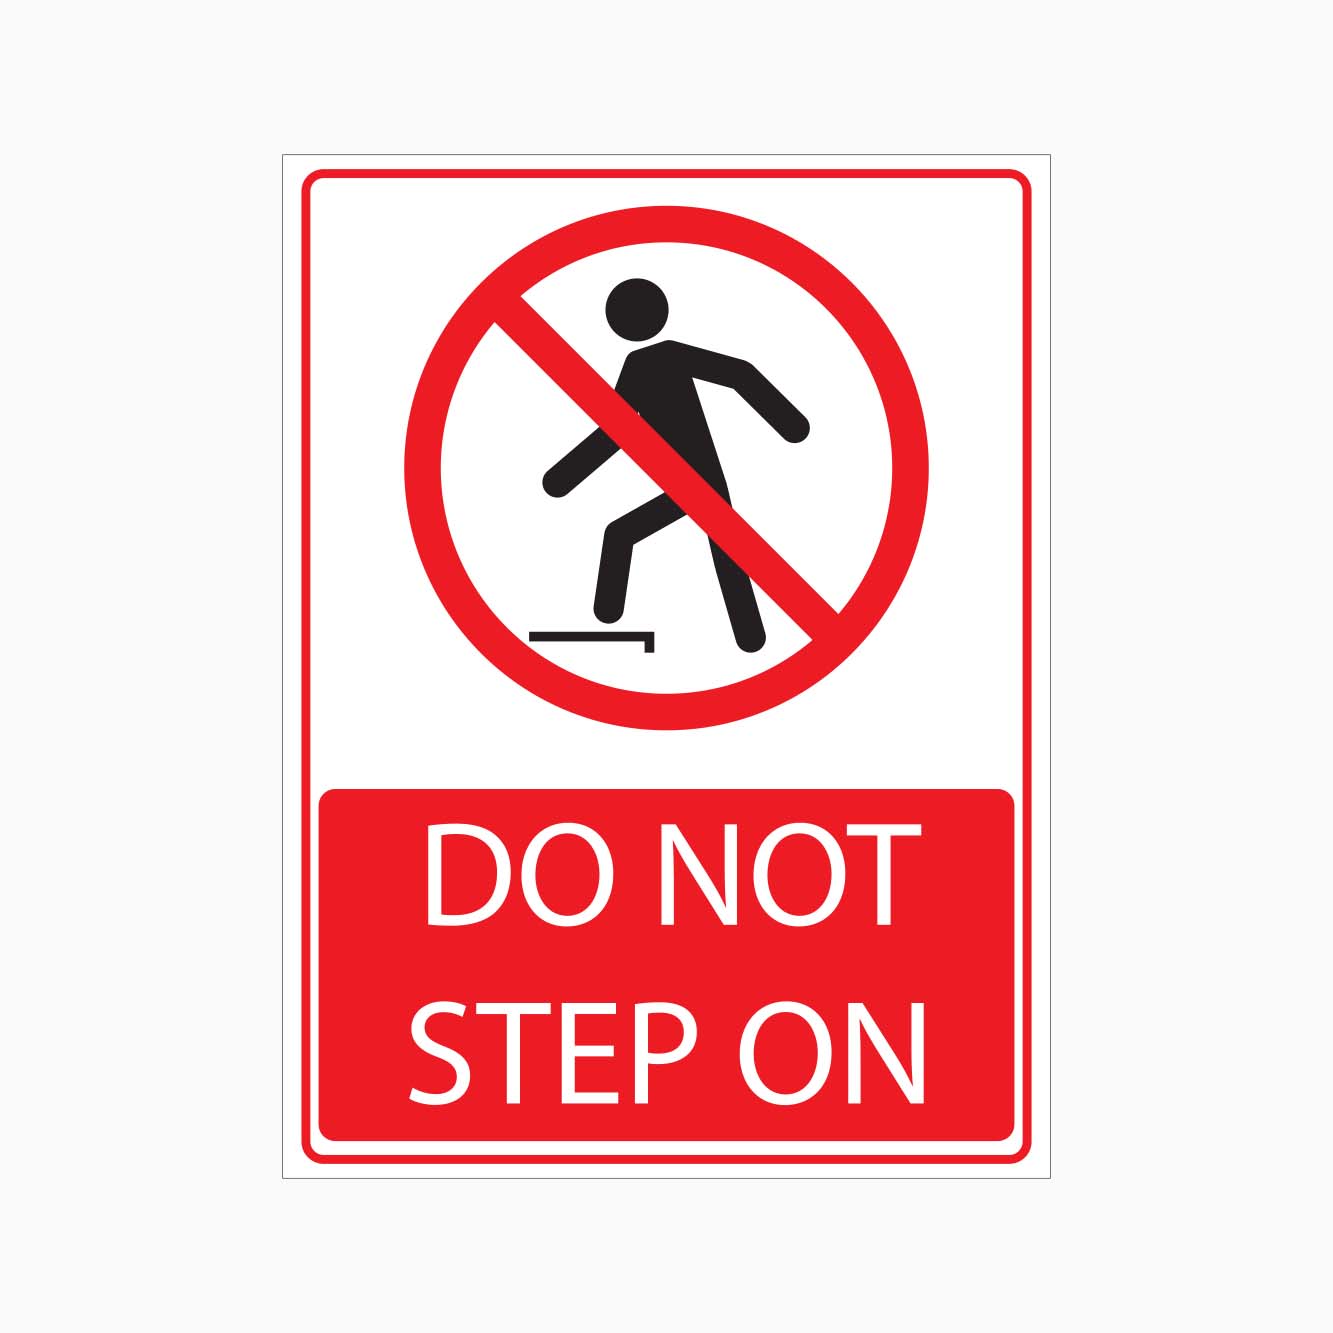 DO NOT STEP ON SIGN - GET SIGNS